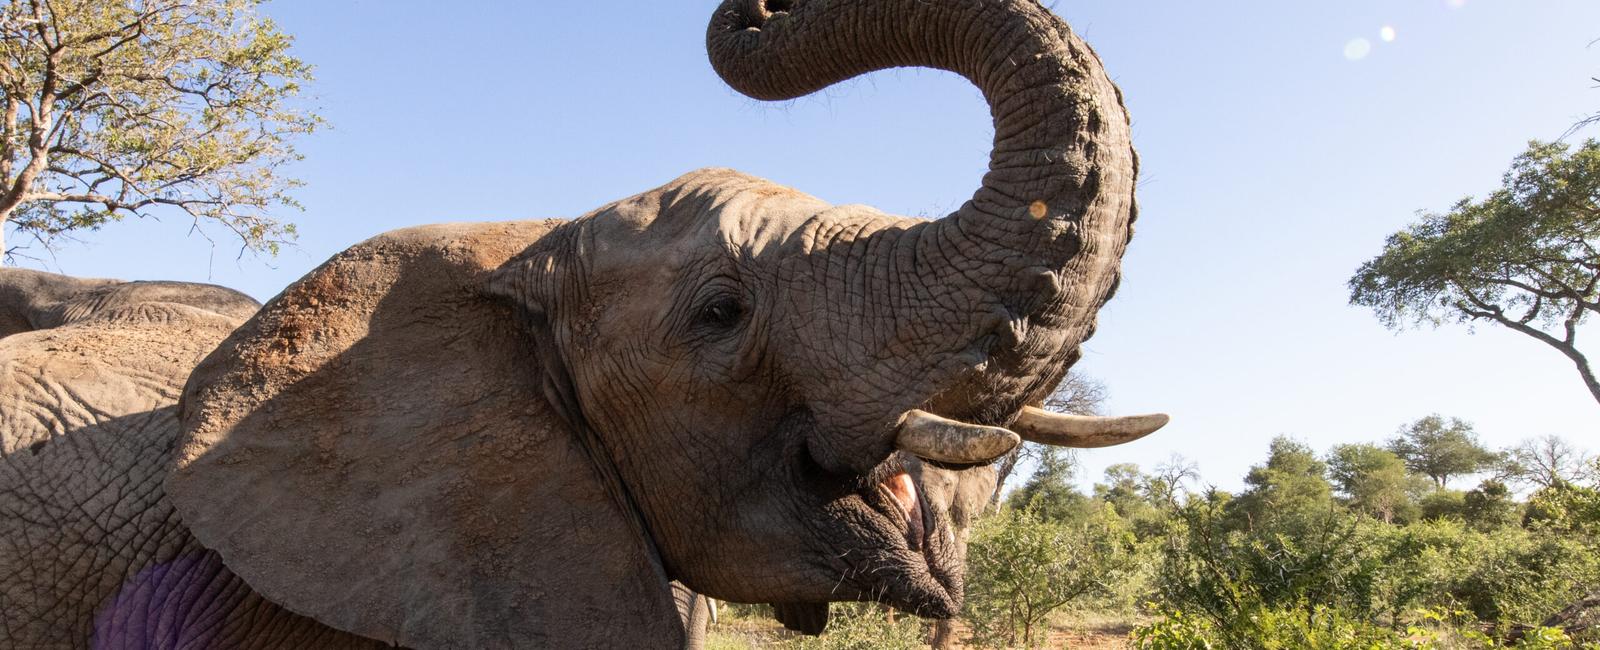 An elephant s trunk has nearly 150 000 muscle units and tendons to give them plenty of precision feeling and power they can move it in every direction skillfully while picking up heavy items too